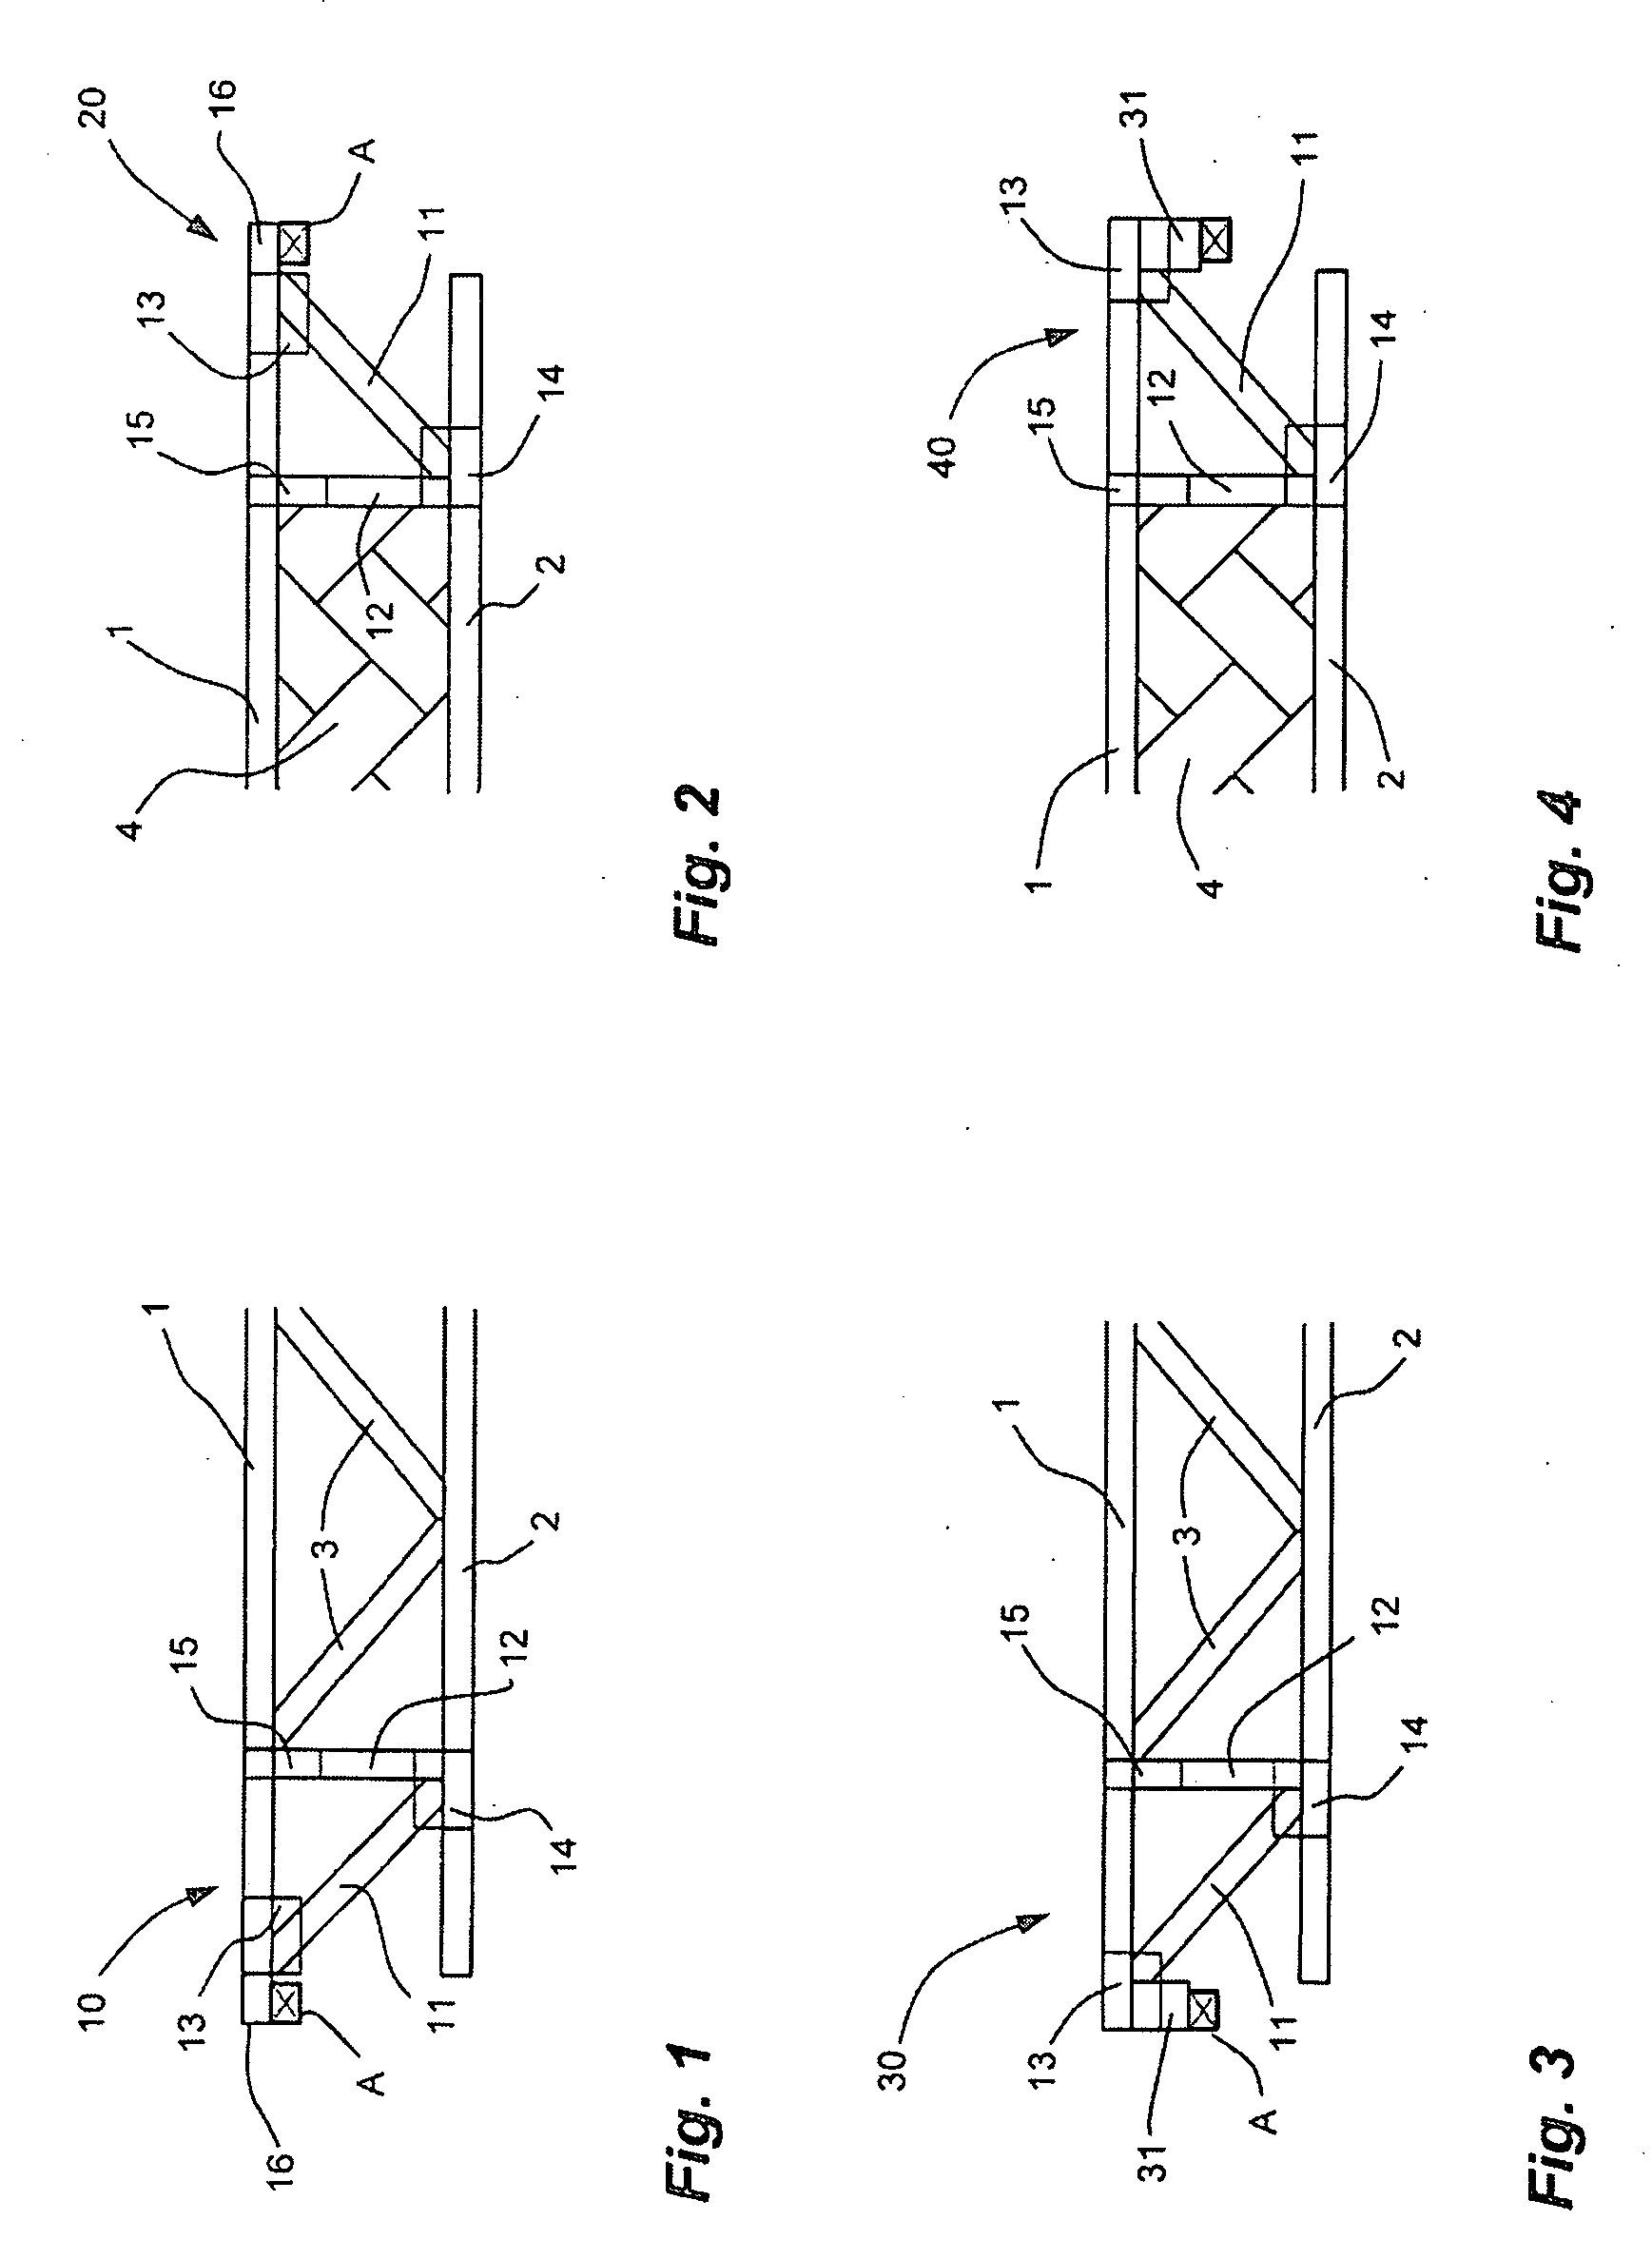 Top-chord bearing wooden joist and method